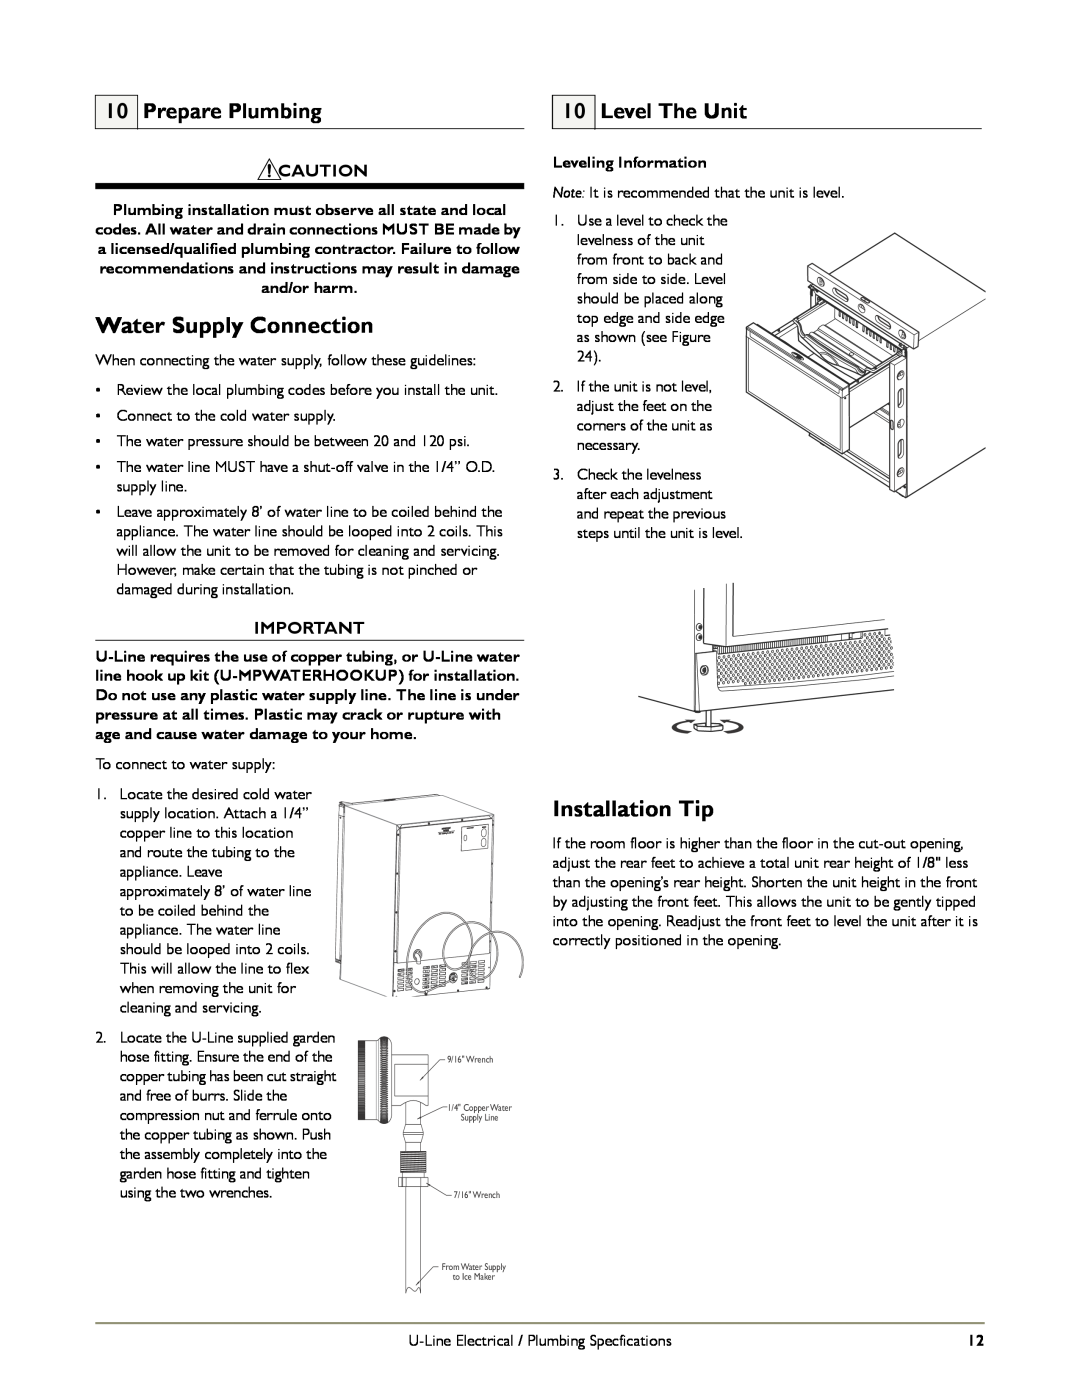 U-Line C2275DWRS manual Water Supply Connection, Installation Tip, Prepare Plumbing, Level The Unit, Leveling Information 